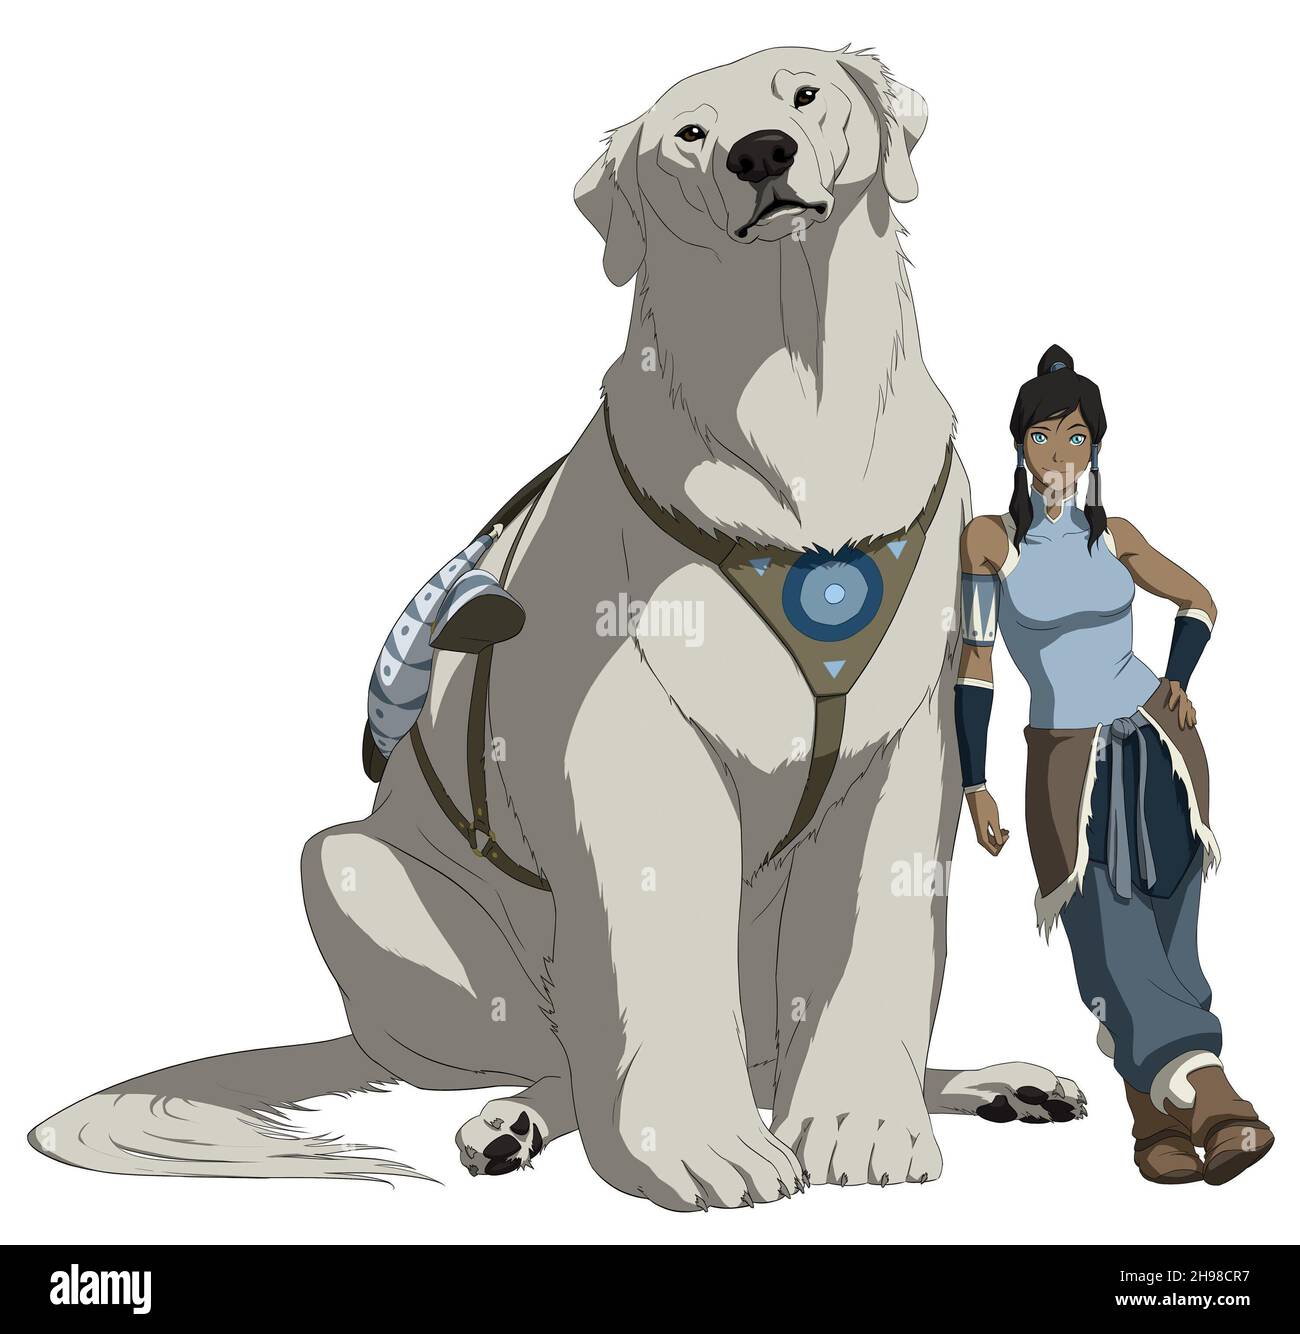 THE LEGEND OF KORRA (2012), directed by IAN GRAHAM and COLIN HECK. Credit: Nickelodeon Animation Studios / Album Stock Photo